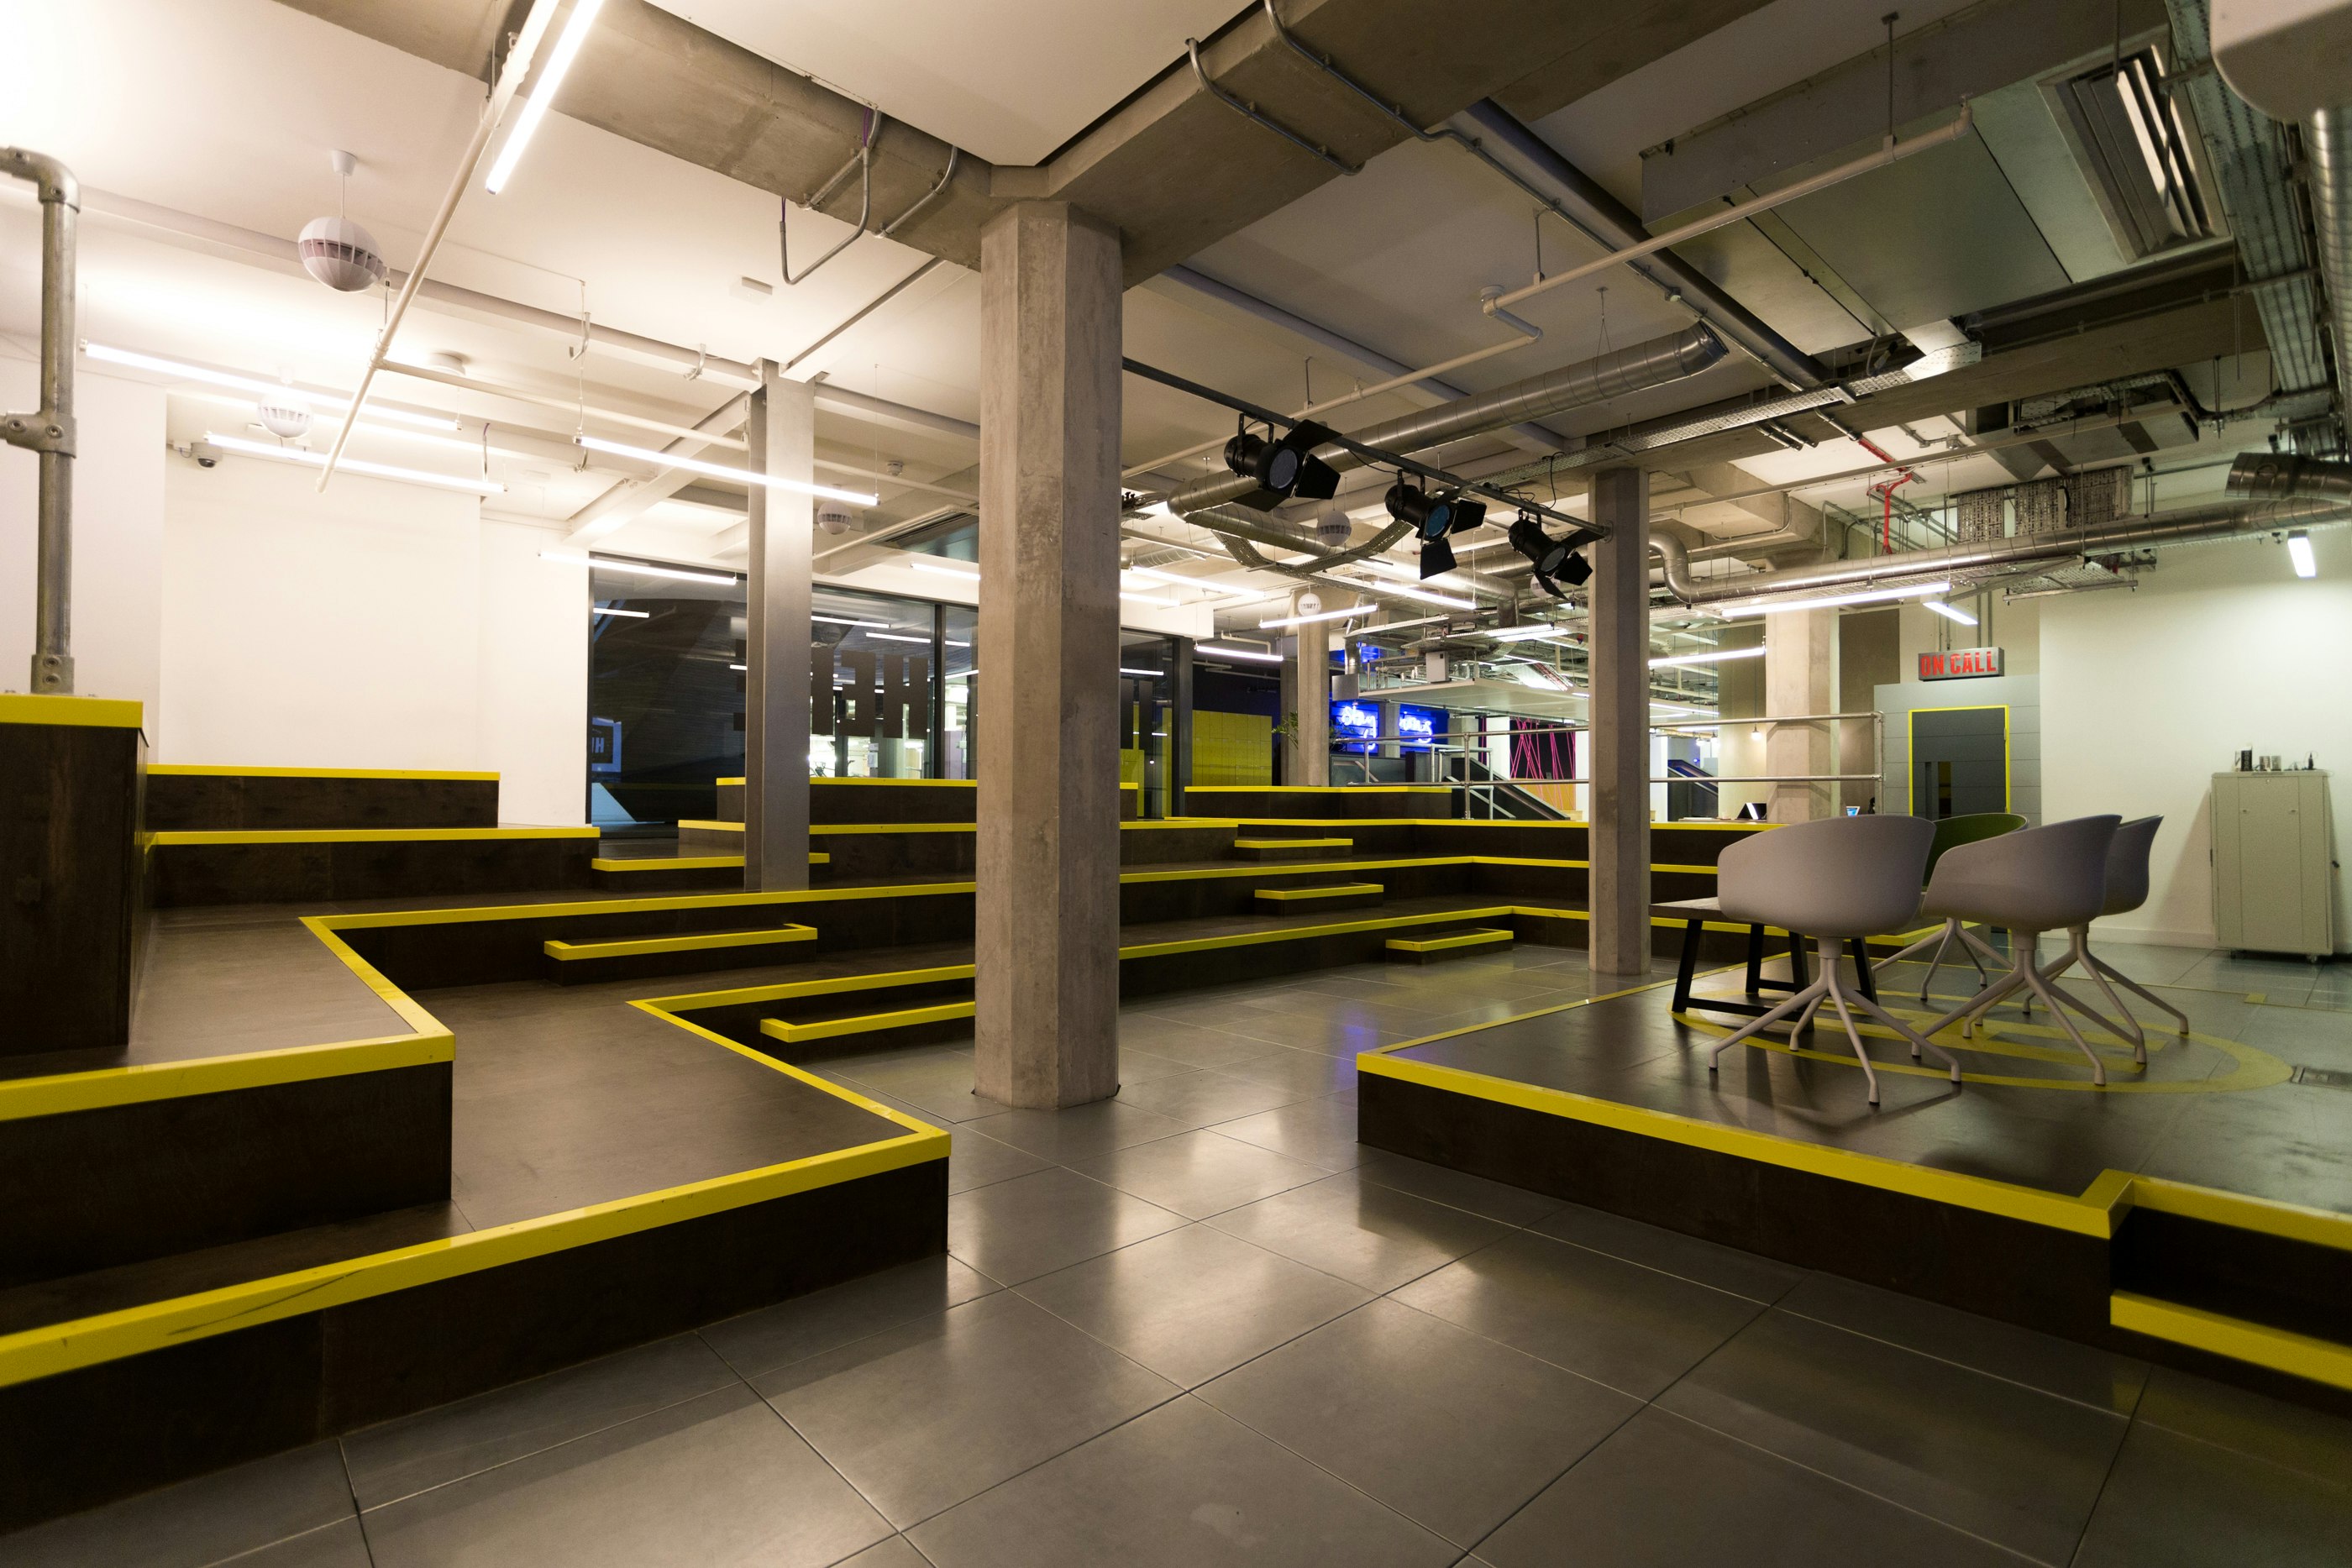 Huckletree Shoreditch - The Auditorium - Event Space image 2